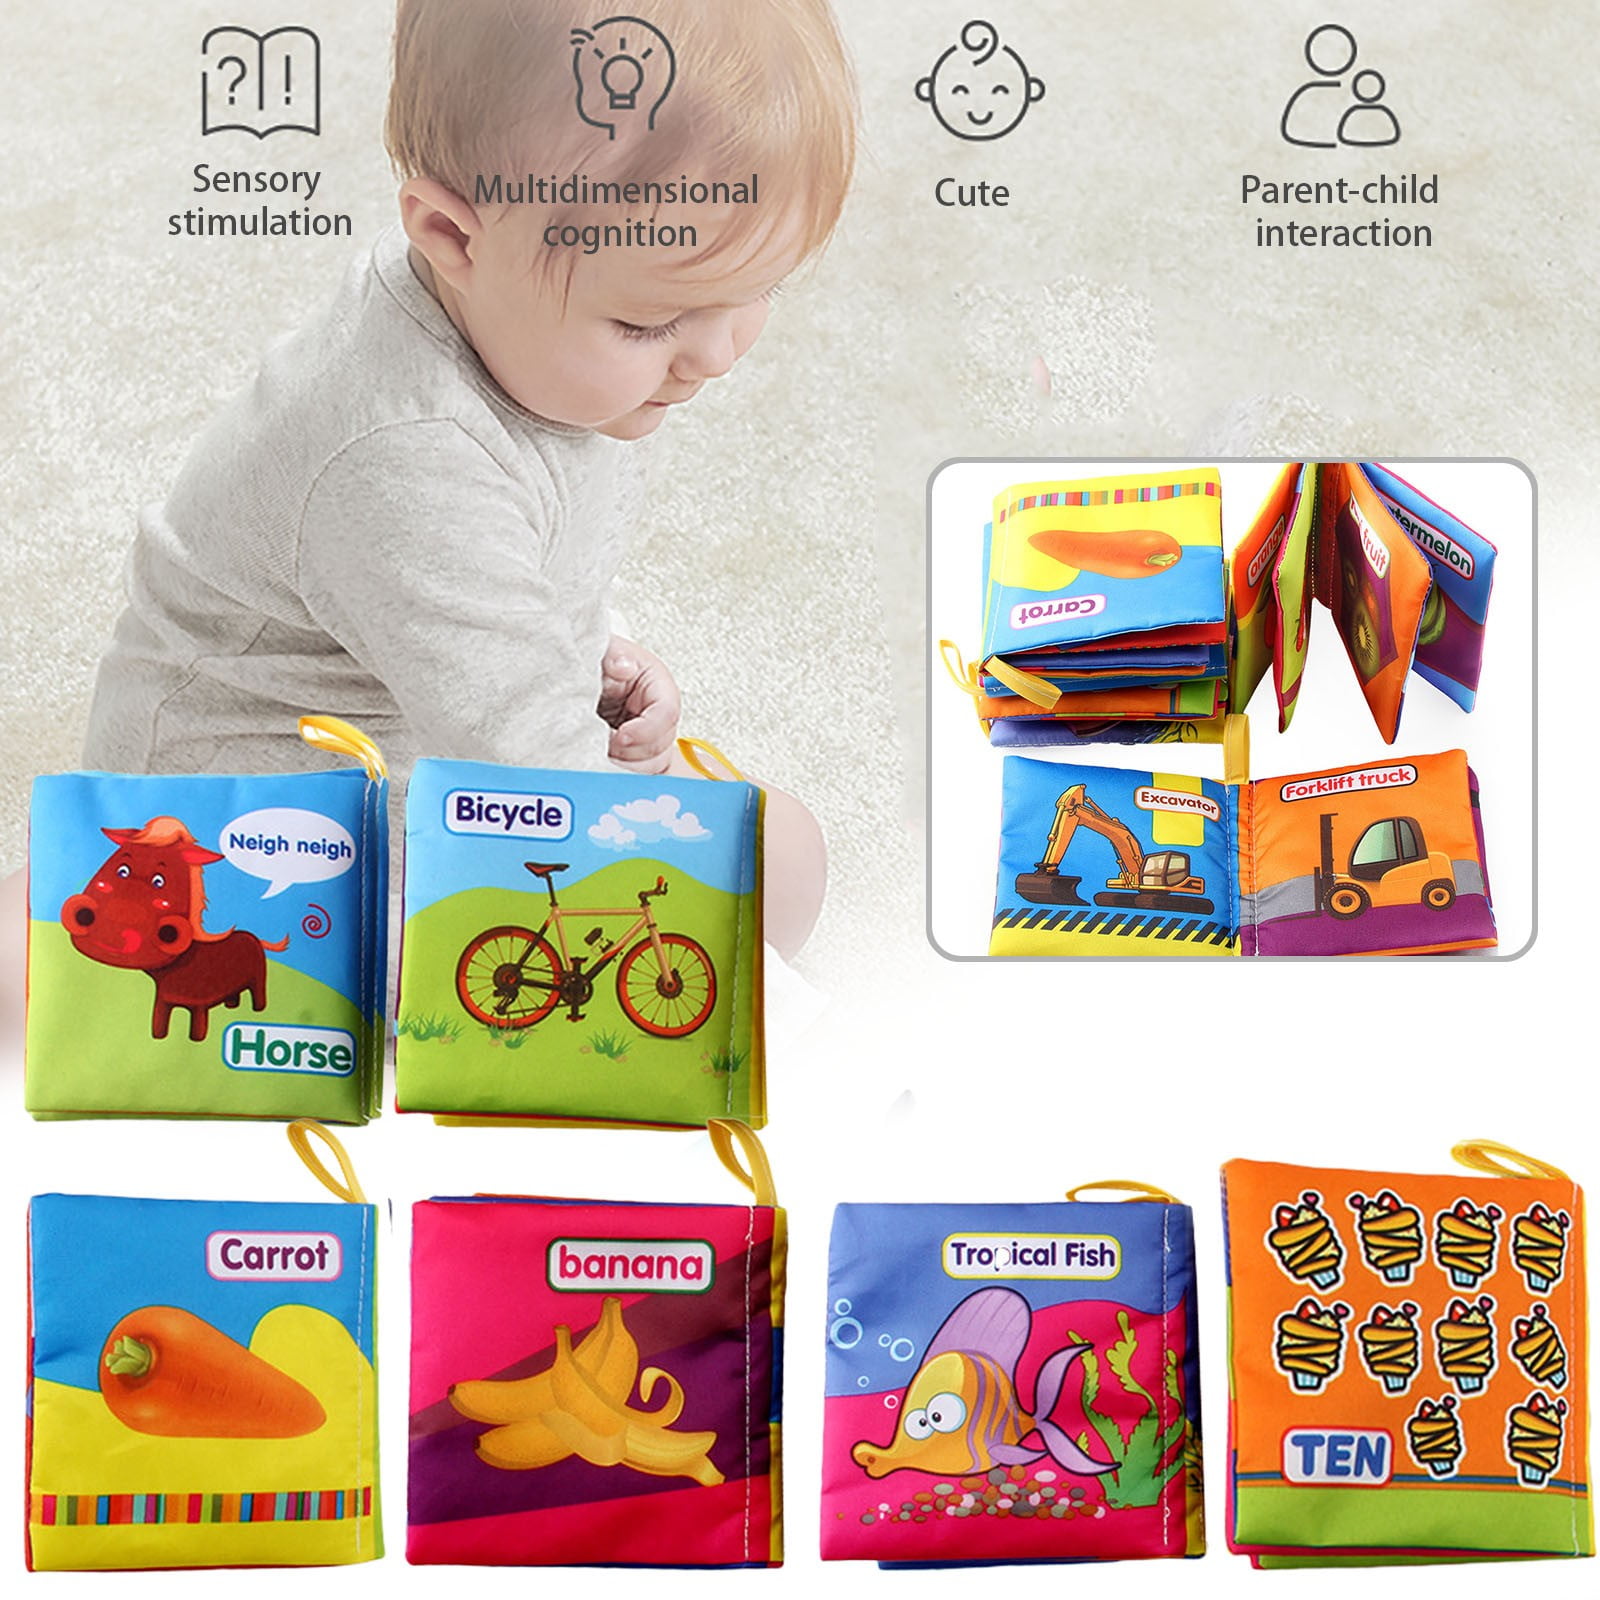 Kids Infant baby intelligence mental development activity cot cloth book toy FI 